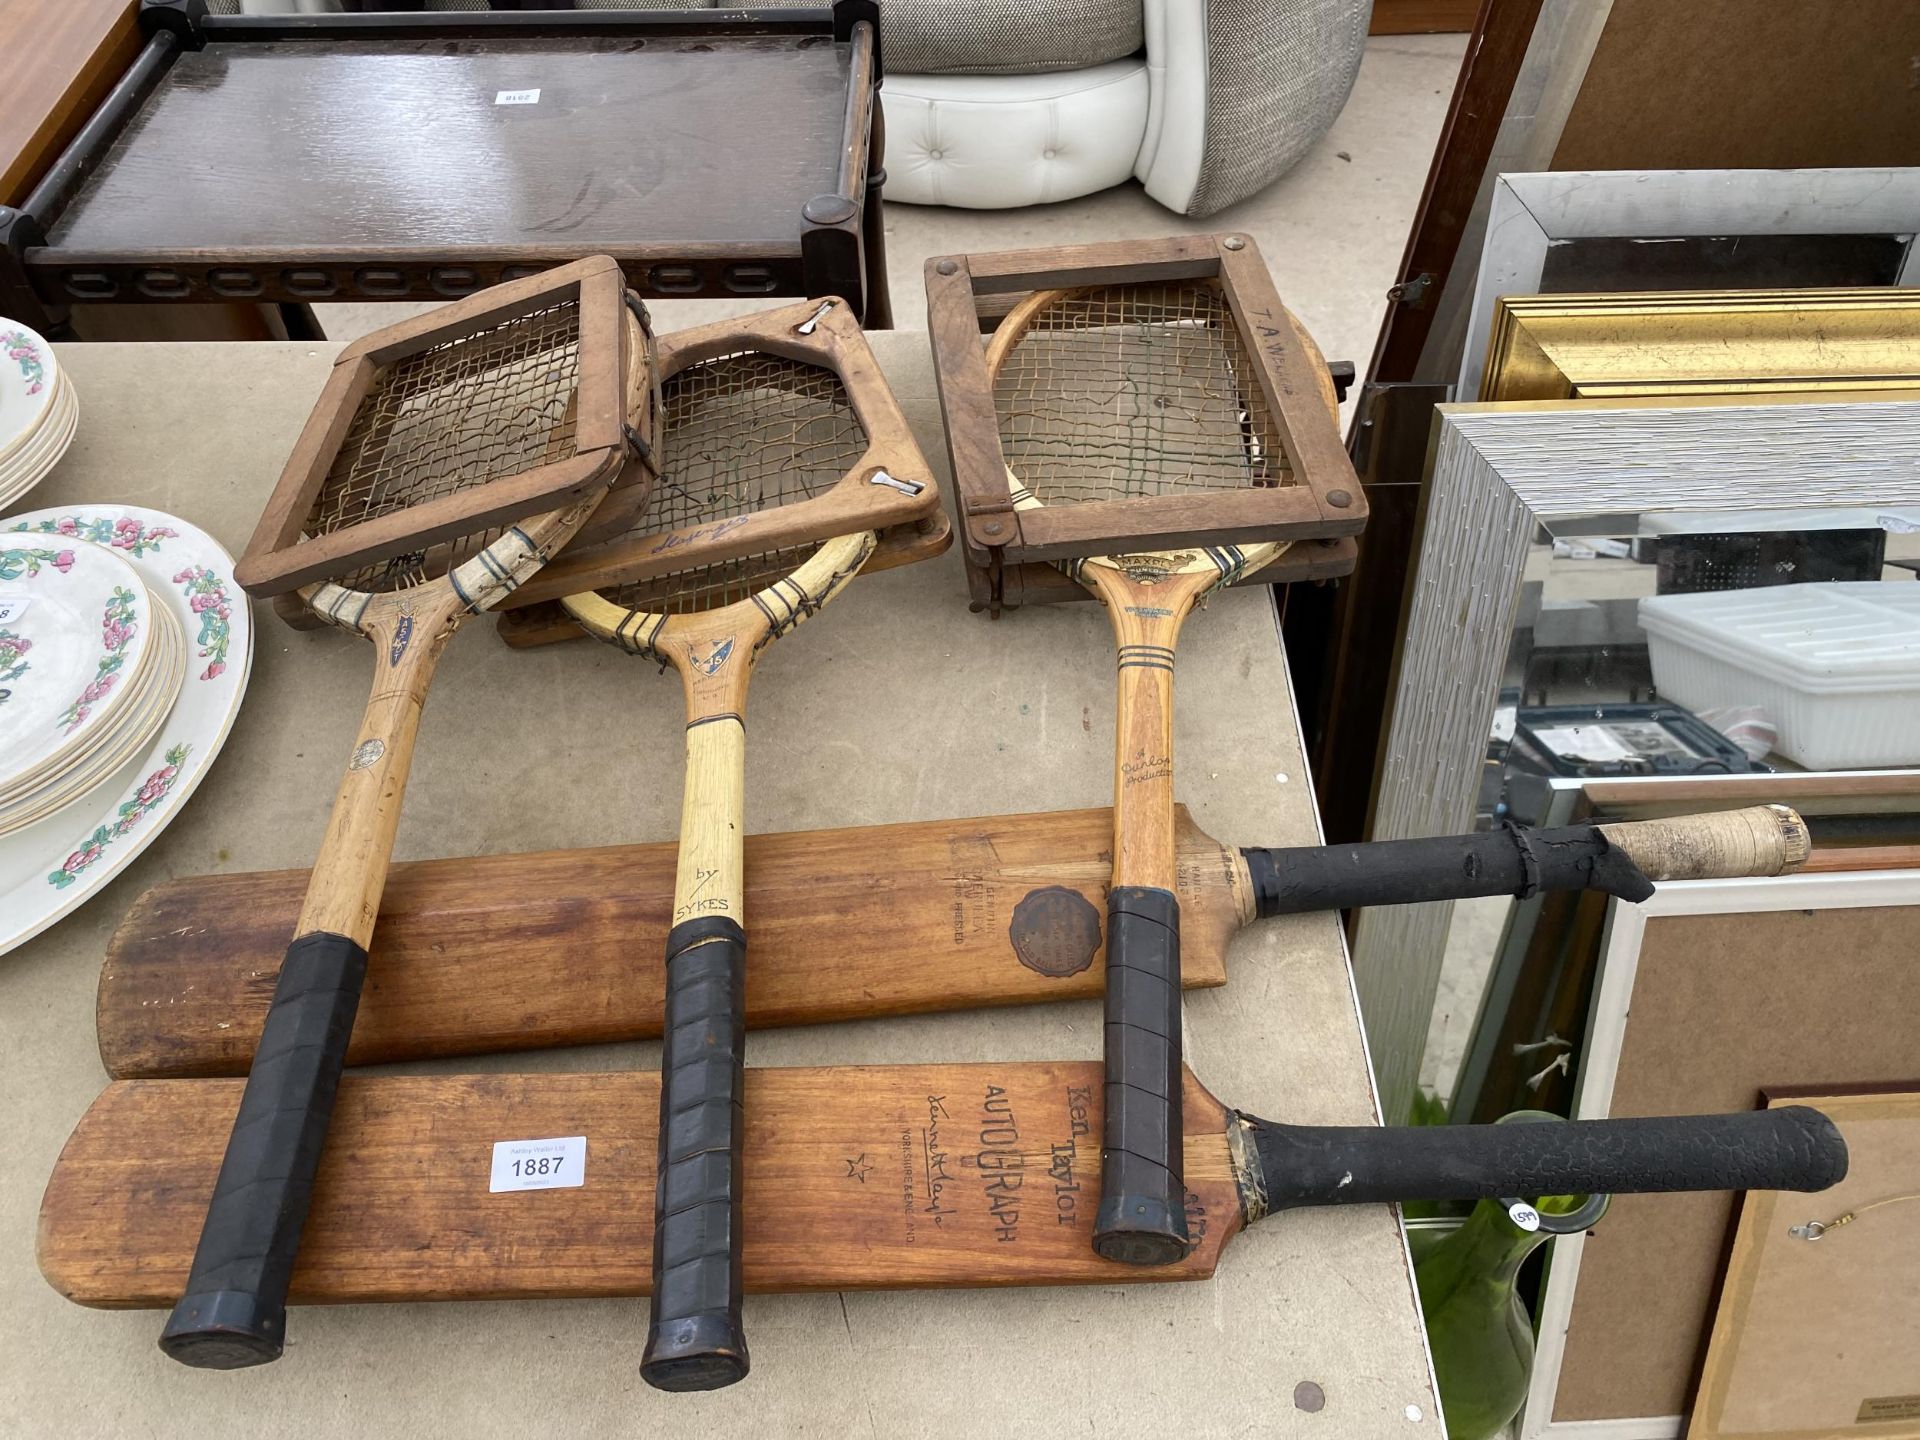 THREE VINTAGE TENNIS RACKETS AND TWO VINTAGE CRICKET BATS